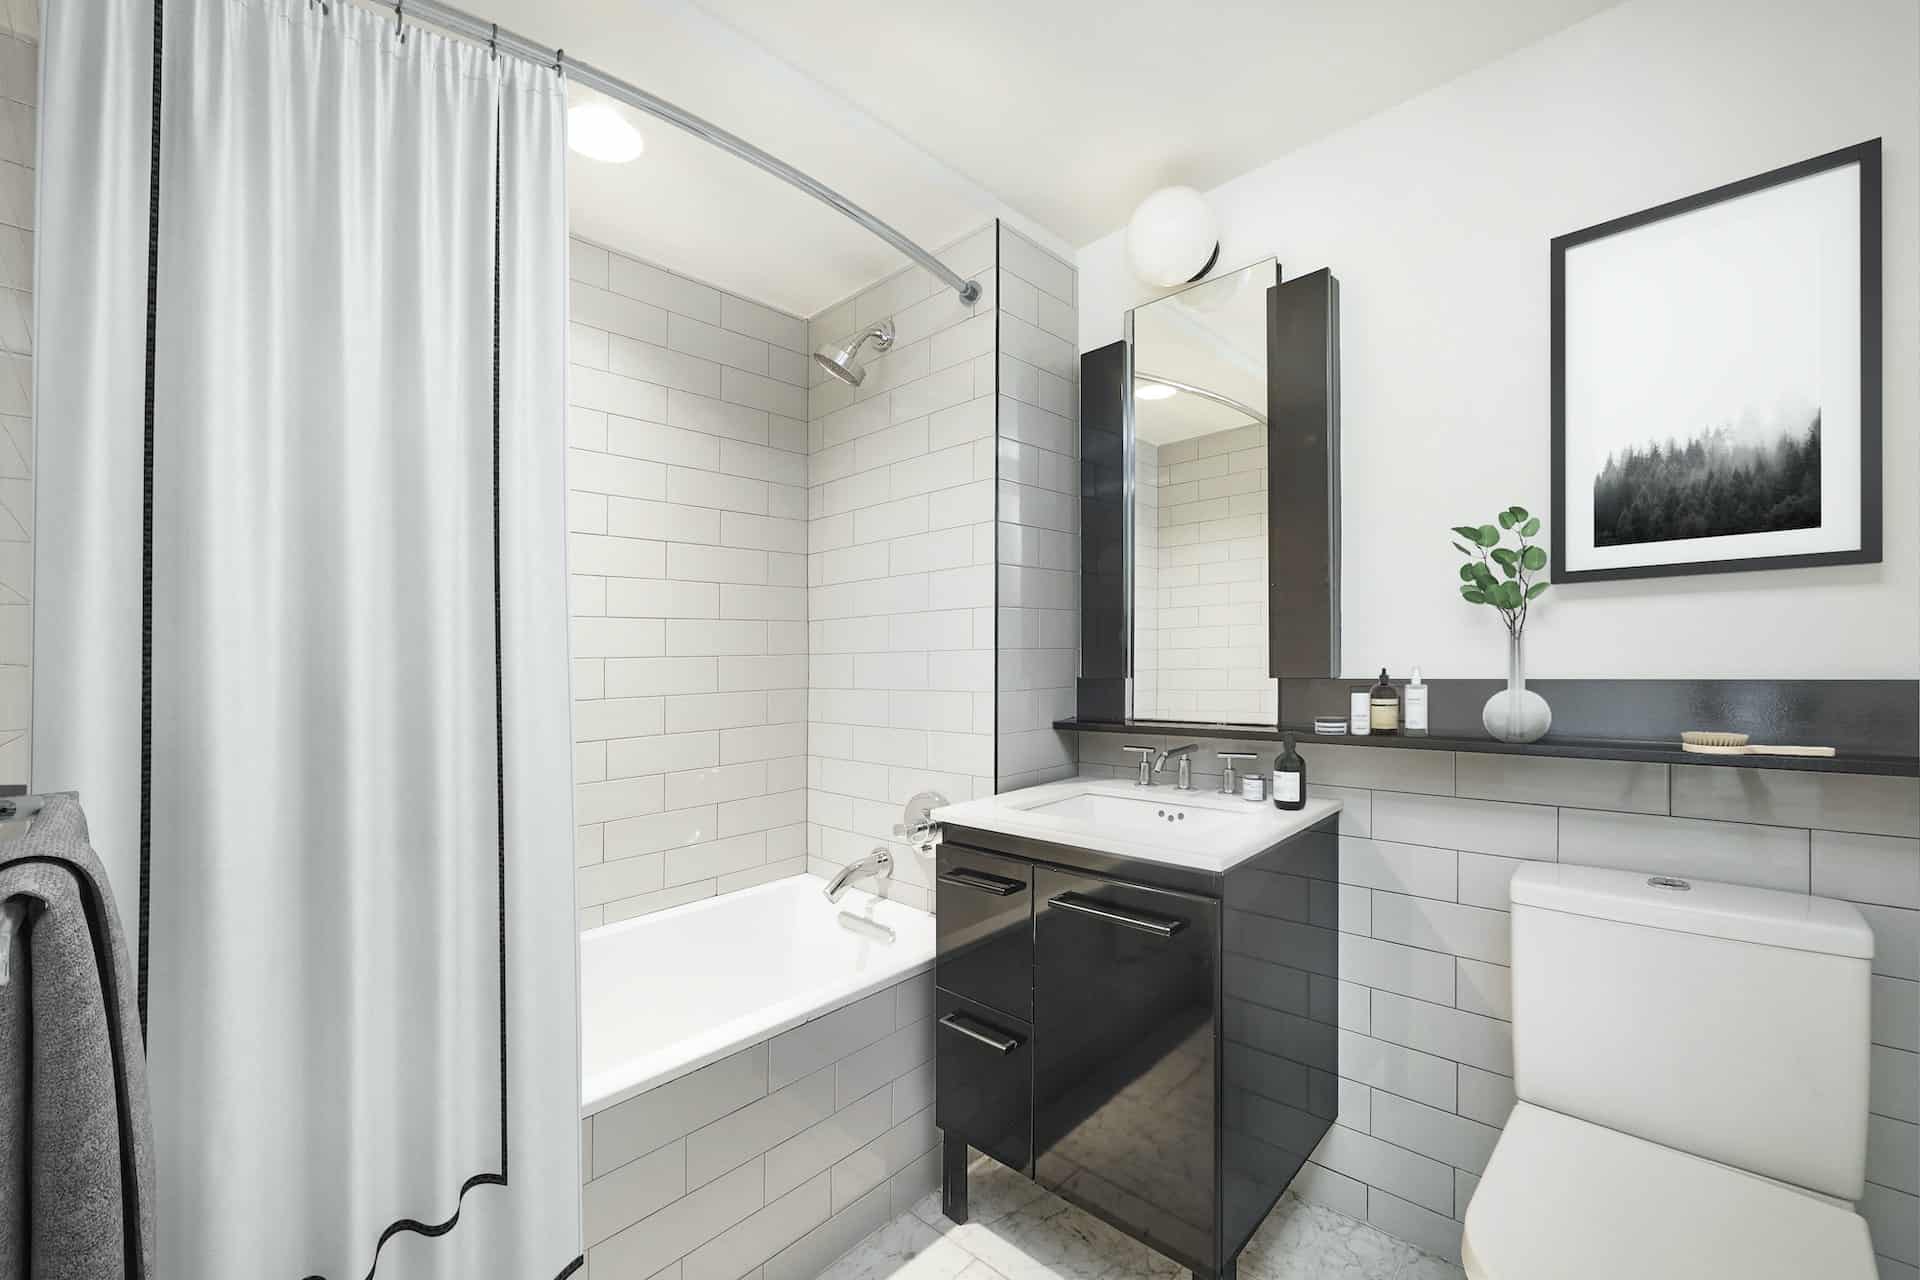 Bathroom at 101 East 10th Street with single vanity, vertical rectangle mirror, and a soaking tub with shower and white tile.